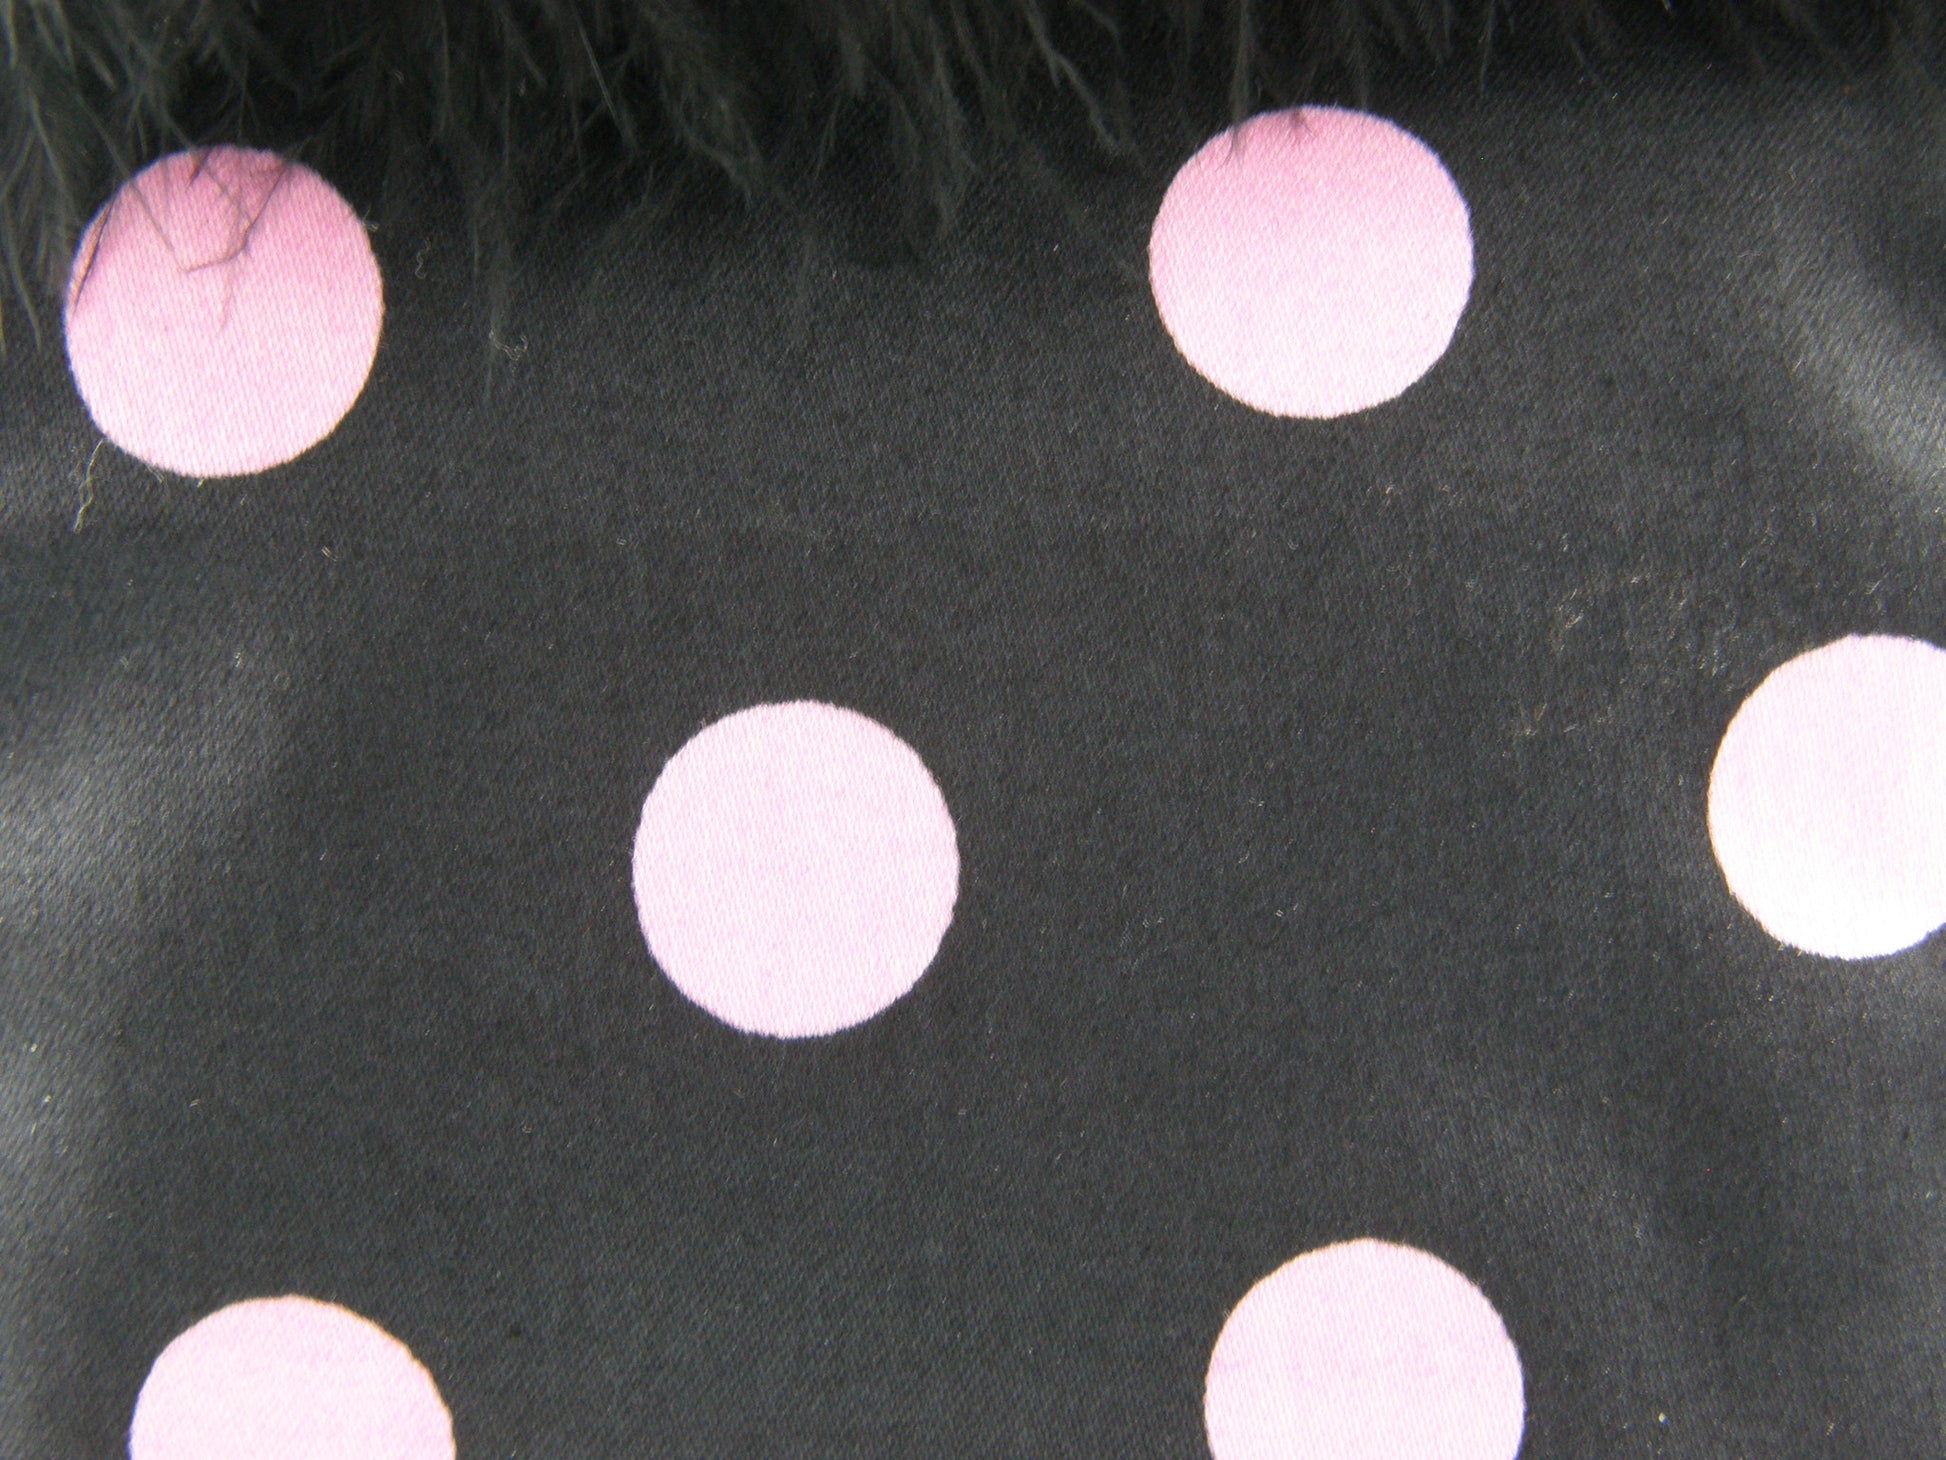 Black and Pink Evening Bag from Jenny Jag-Wear Design. Photo shows close up of the black and bubble-gum pink polka dotted fabric. The merle collection by Jenny Jag-Wear Design.